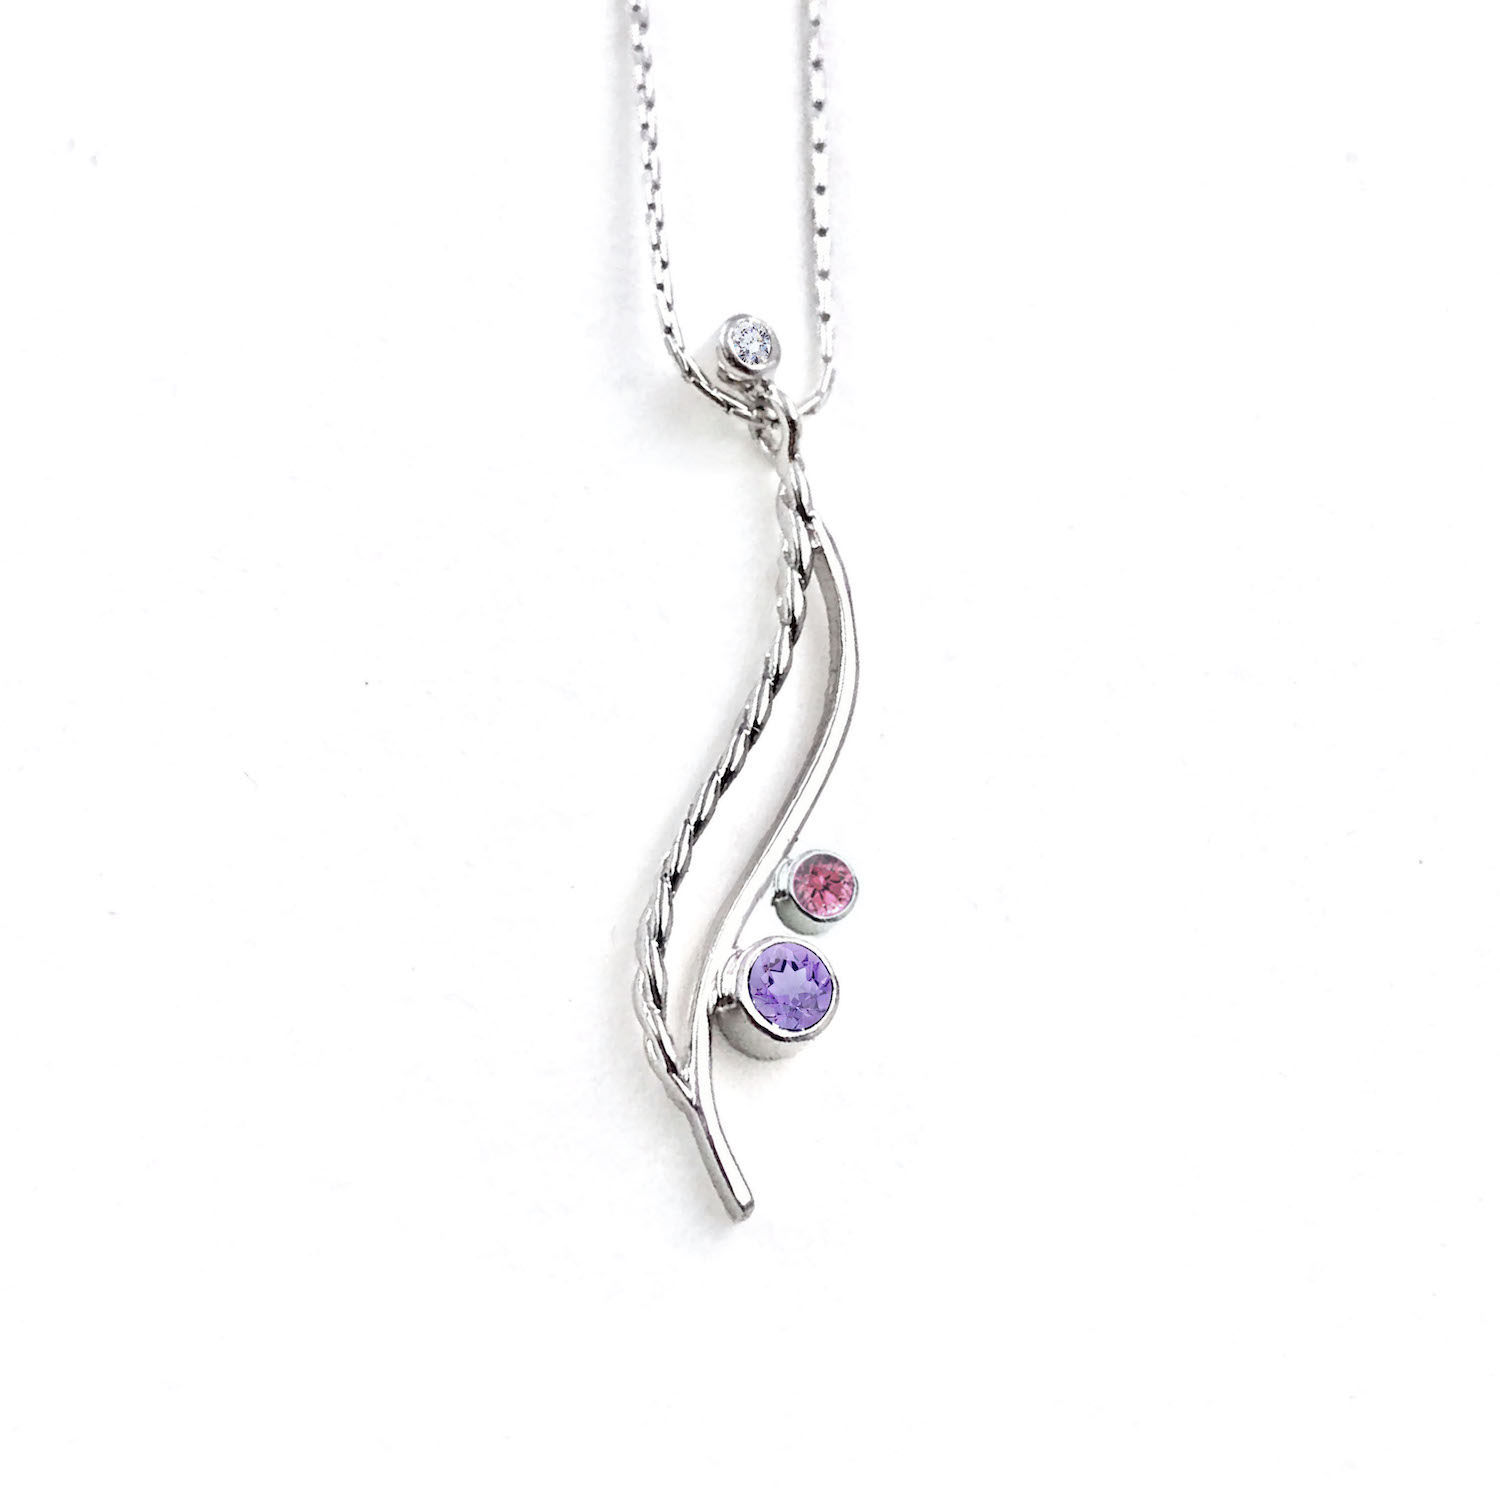 Amethyst-PinkSpinel-twist-wave-accent-pendant-necklace-C-JeweLyrie-N